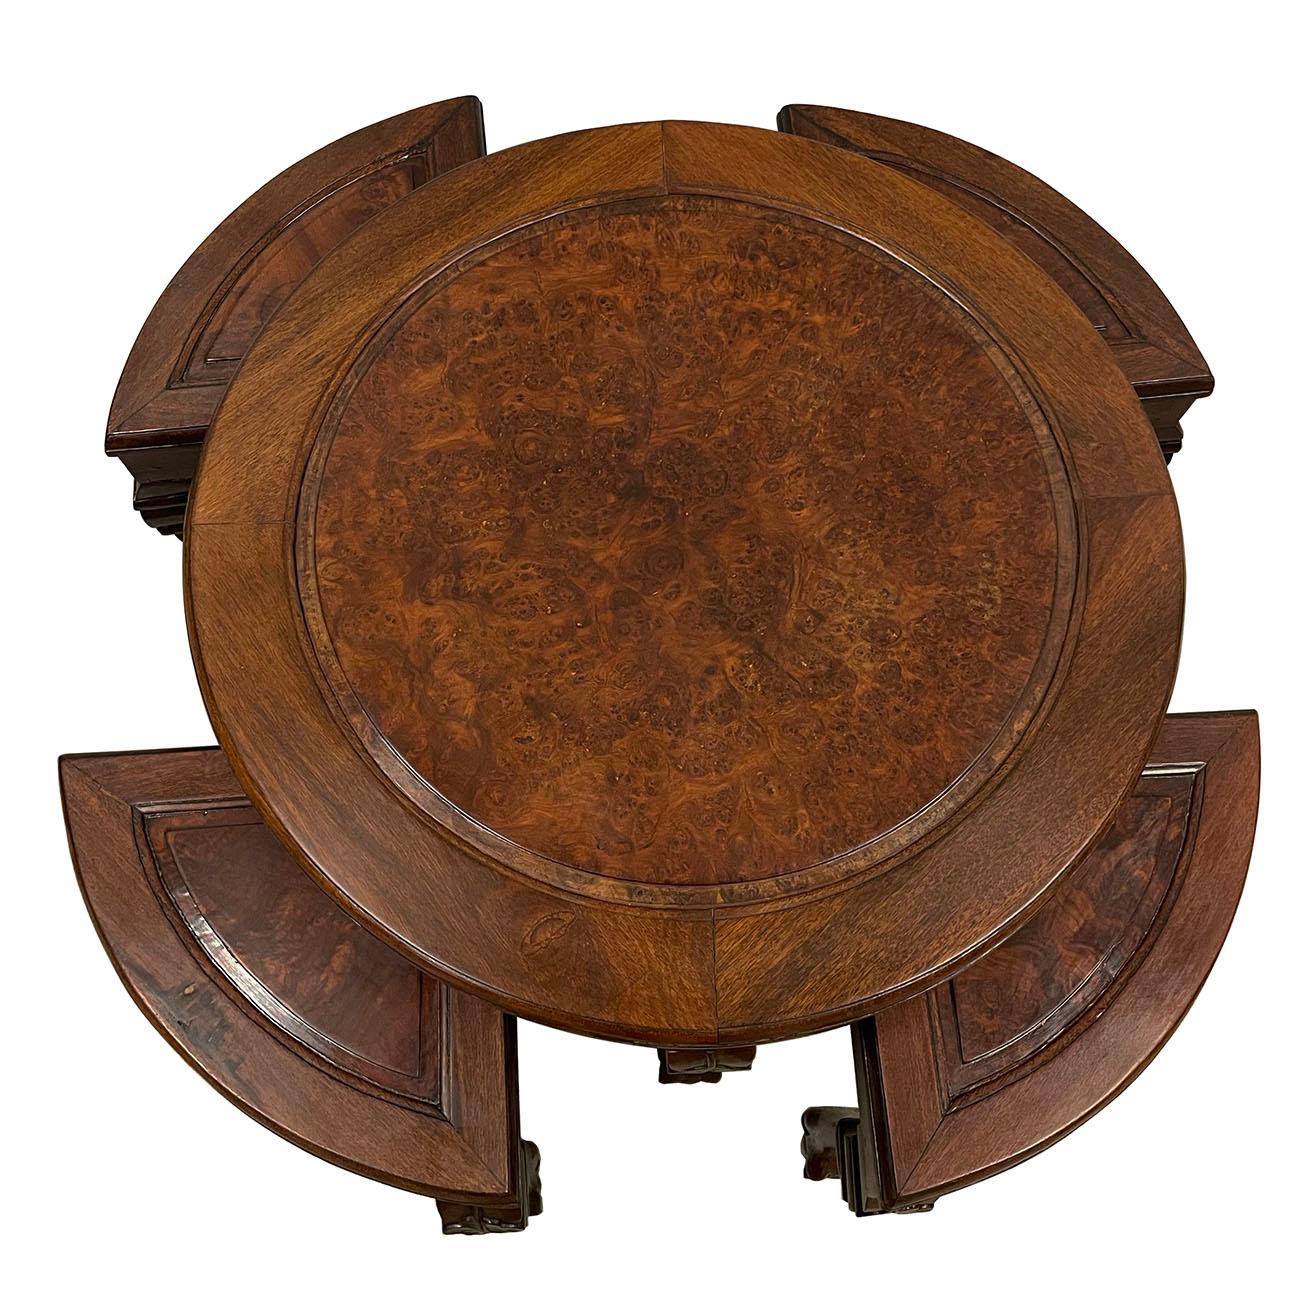 This beautiful carved coffee table from the 1900s is made from solid rosewood and showcases the beautiful details of burl wood on its top surface. Traditional Chinese carvings flow all around the sides and down its “tiger legs.” In addition, there